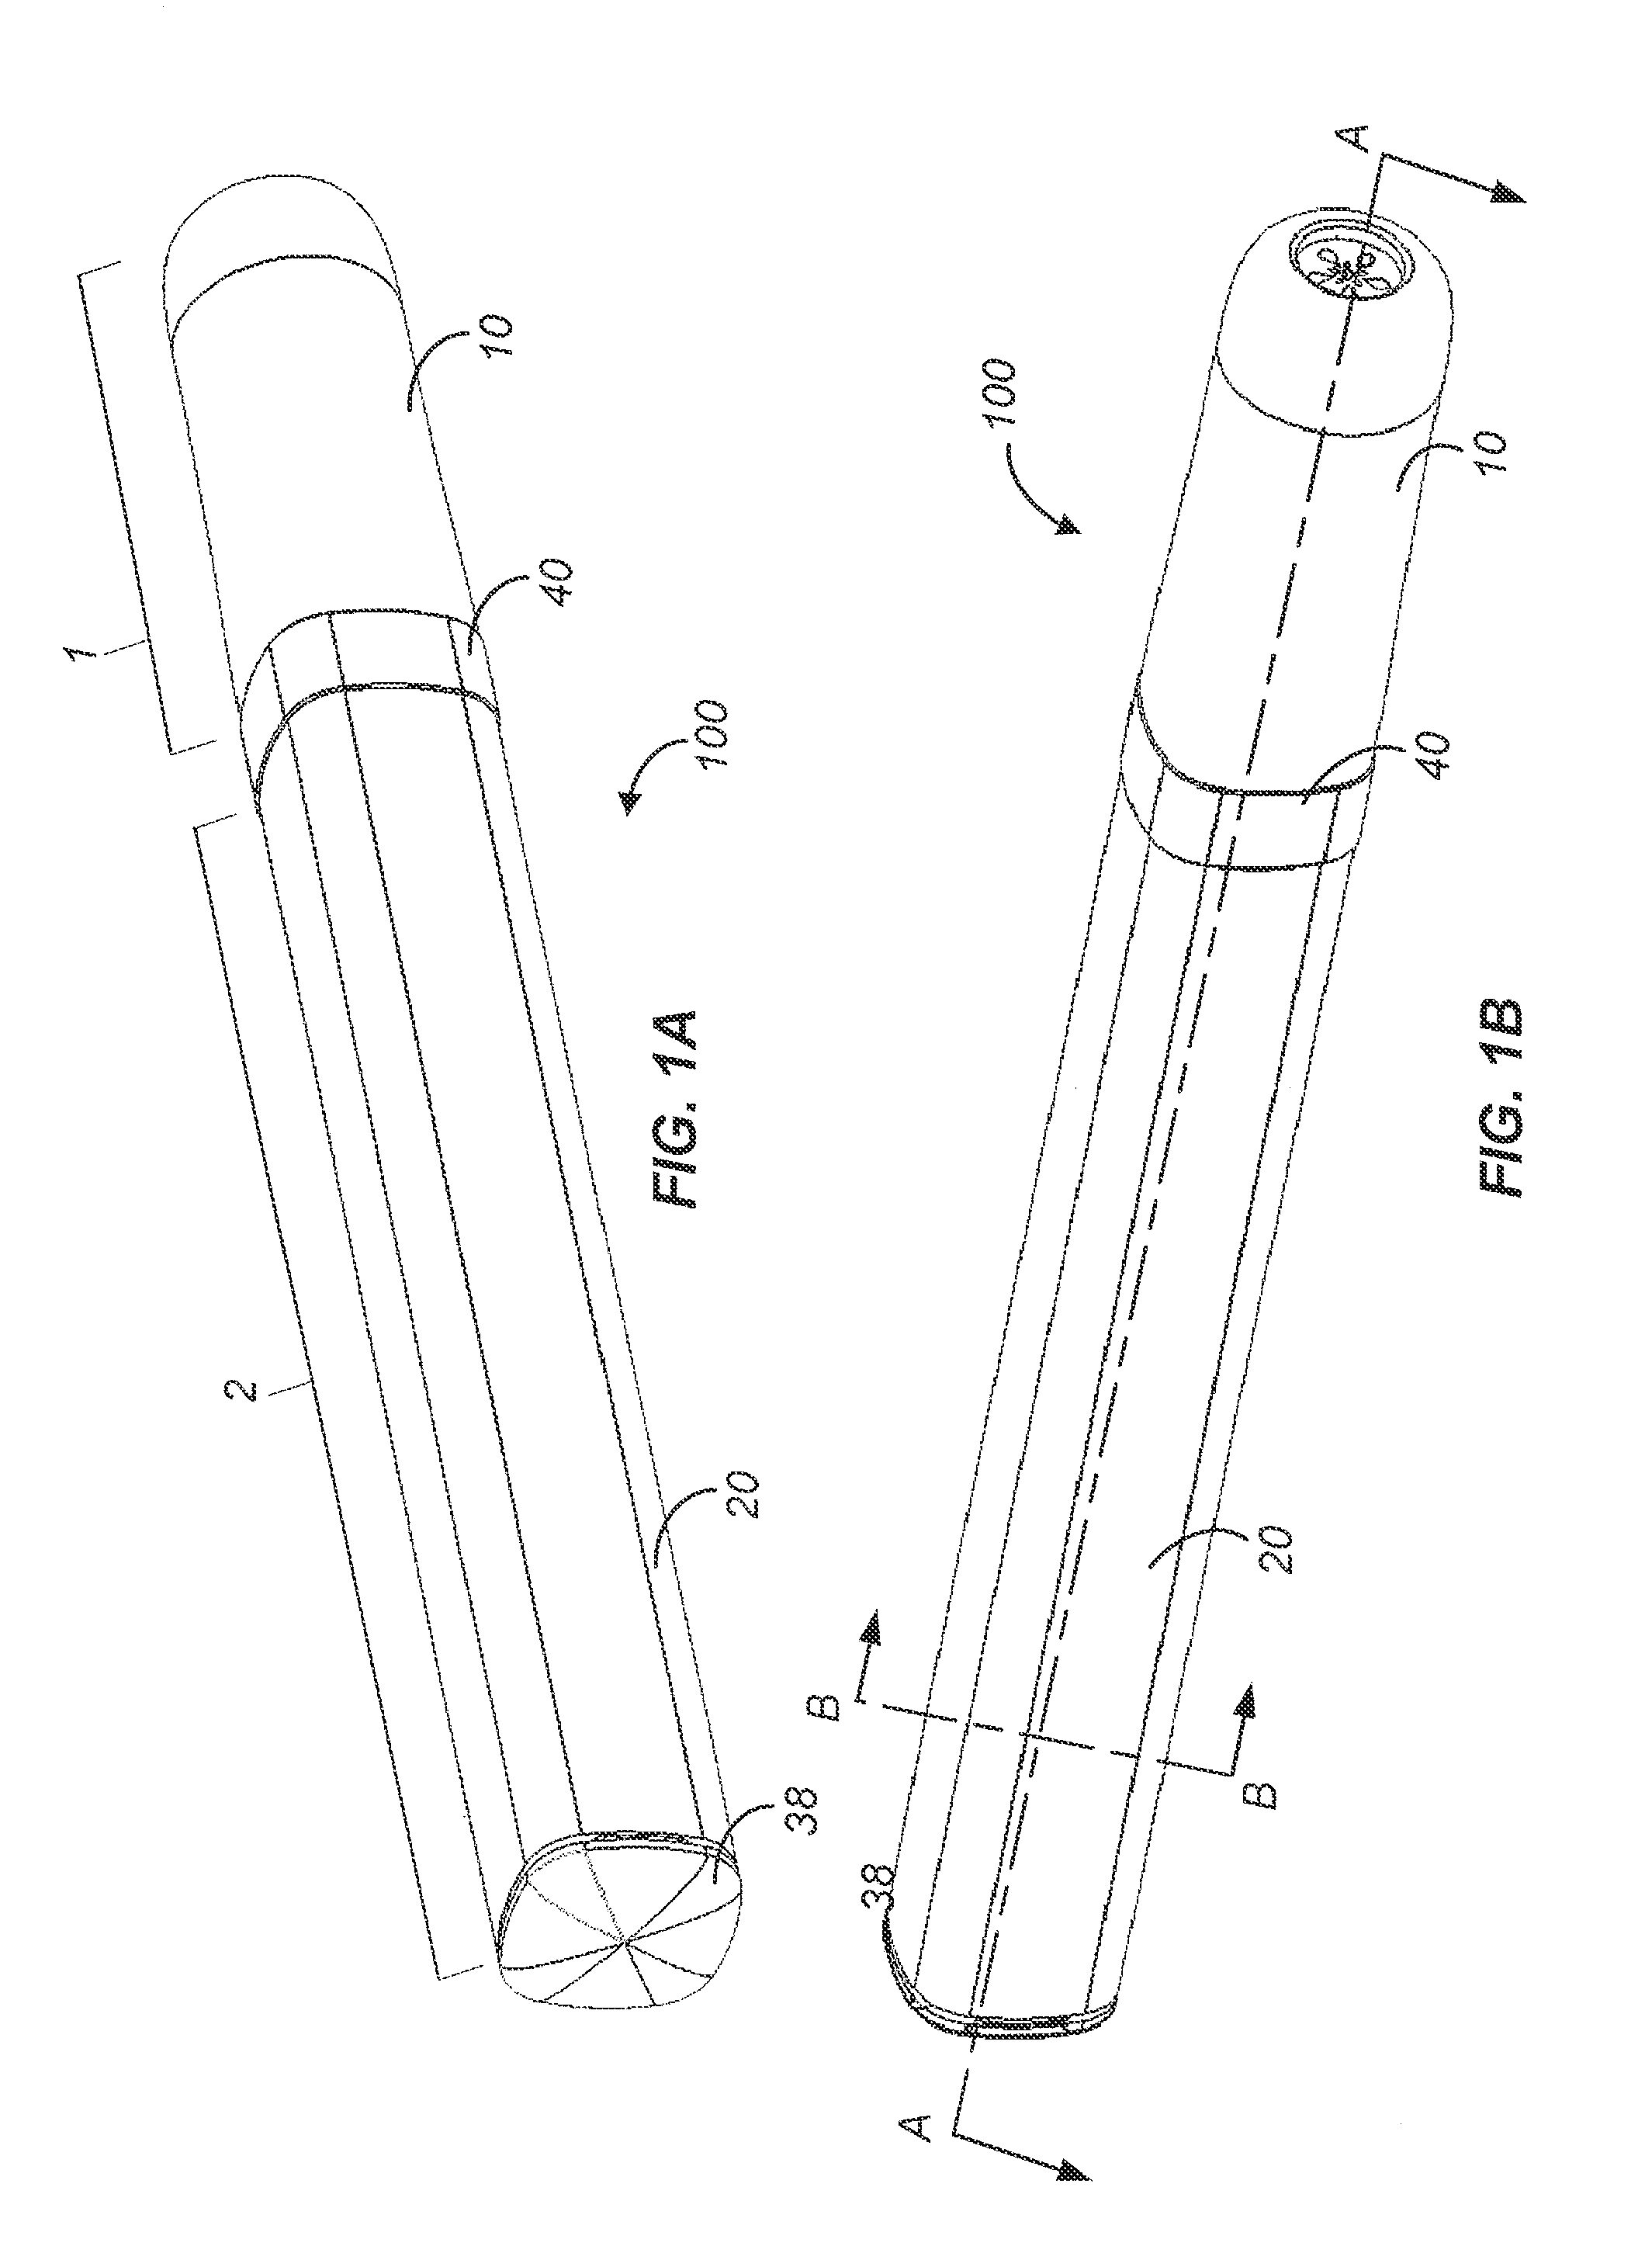 Electronic vaporizing device and methods for use